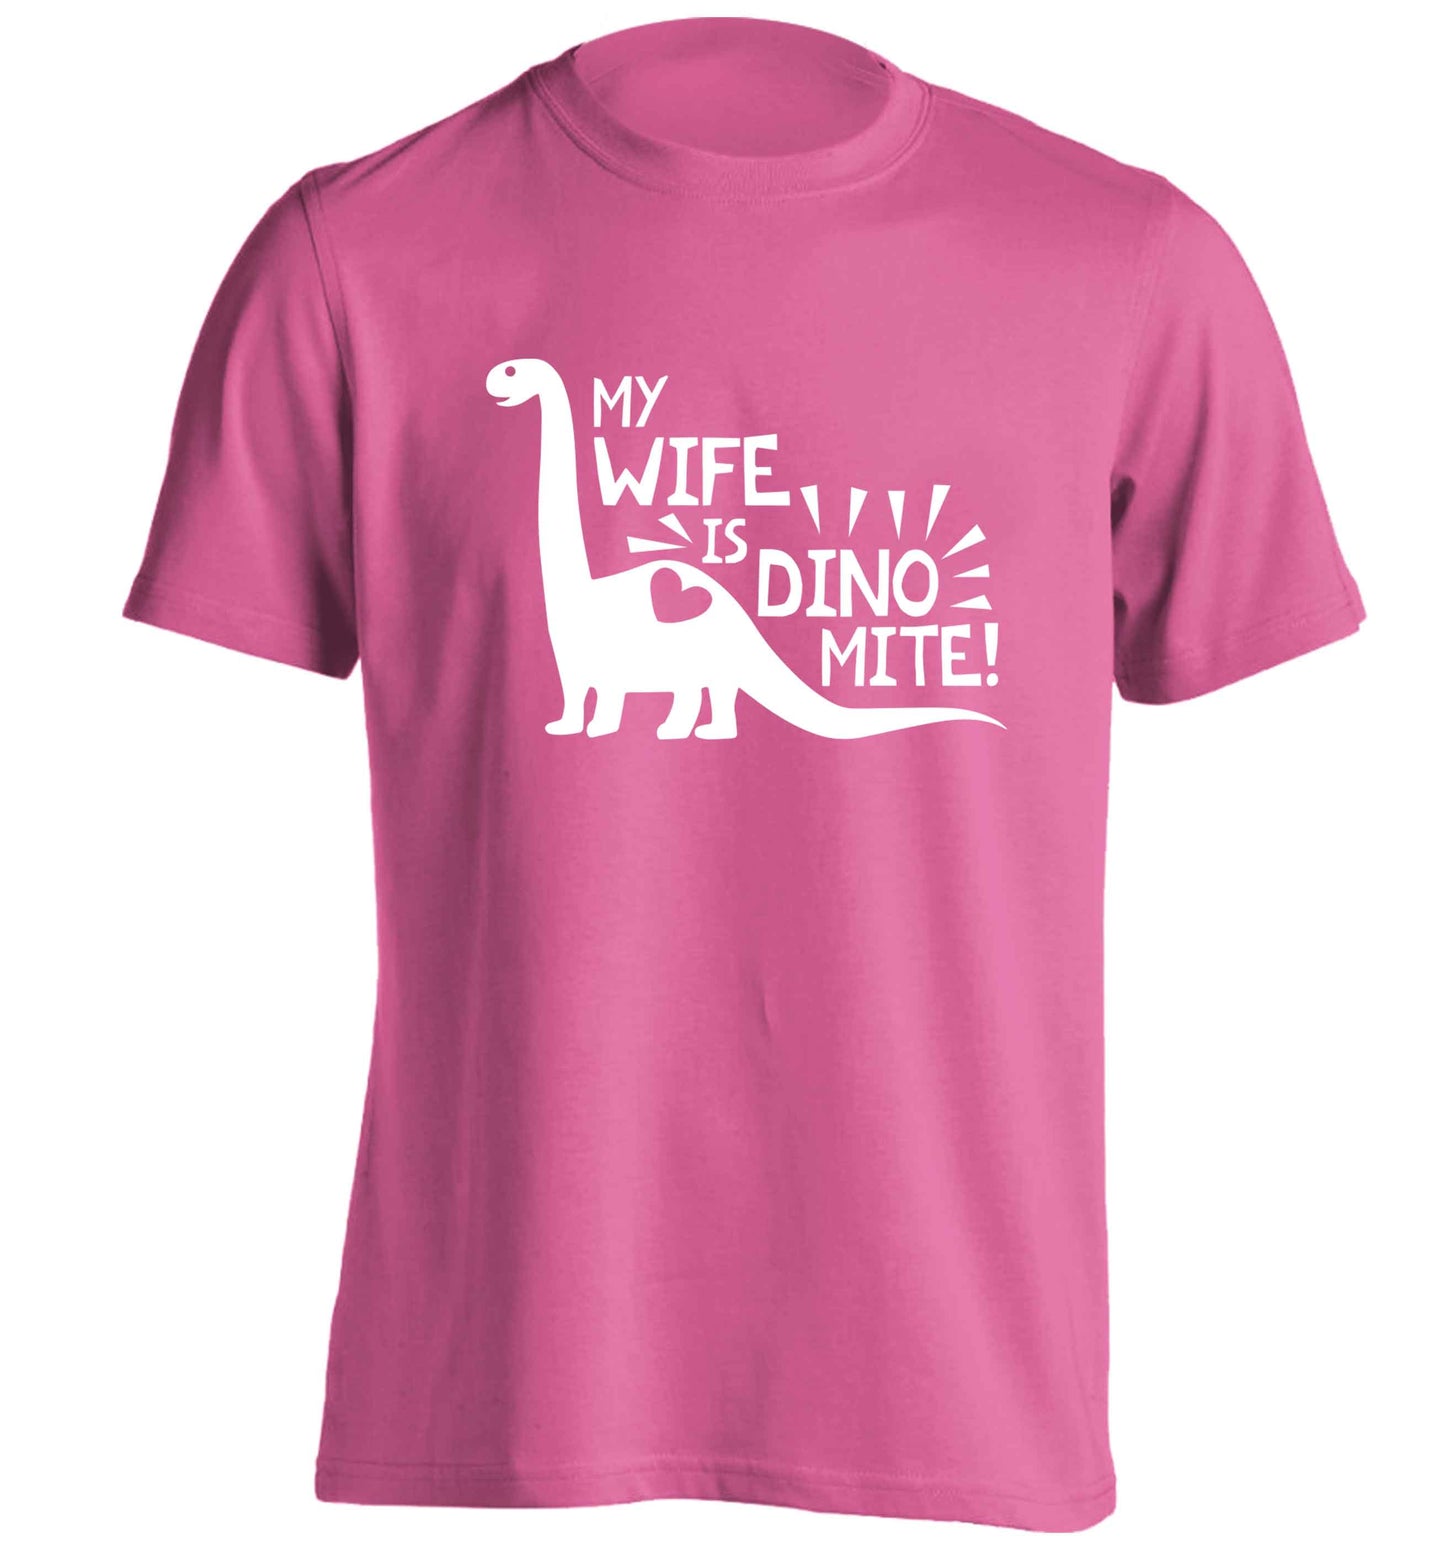 My wife is dinomite! adults unisex pink Tshirt 2XL